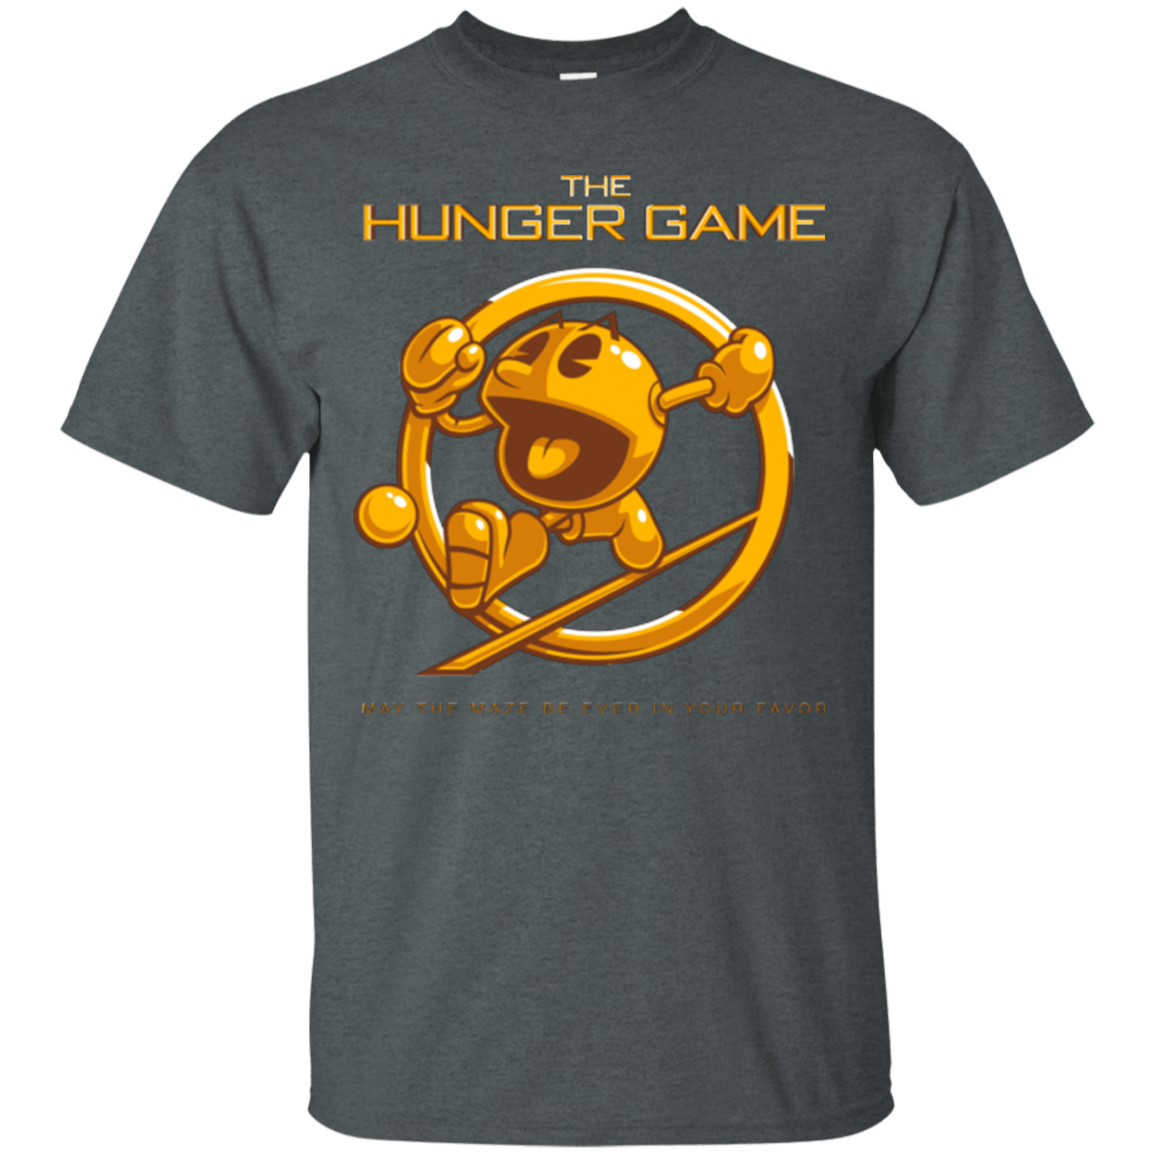 T-Shirts Dark Heather / Small The Hunger Game T-Shirt